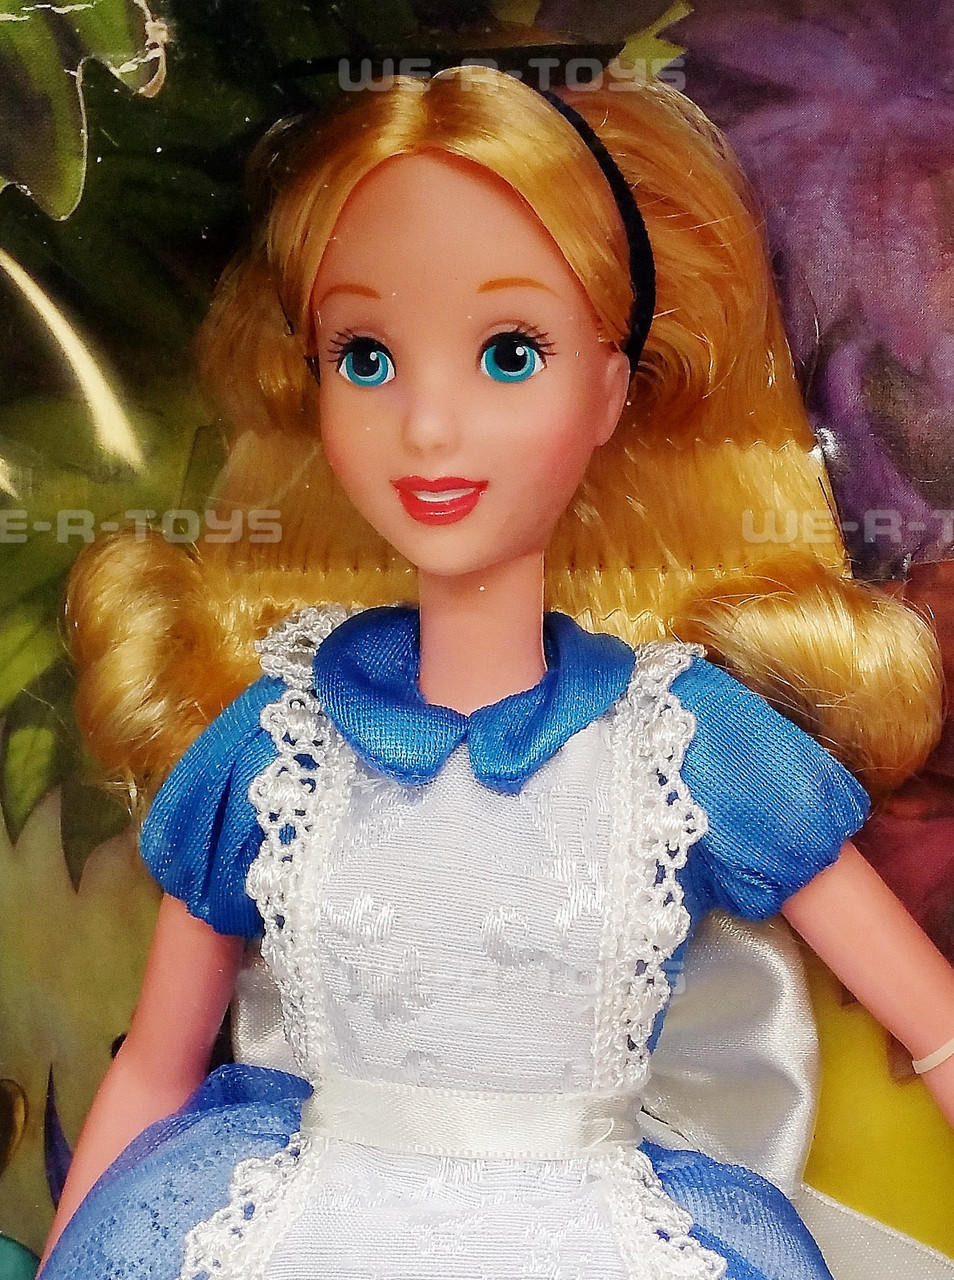 https://cdn11.bigcommerce.com/s-cy4lua1xoh/images/stencil/1280x1280/products/22656/190432/disneys-alice-in-wonderland-with-cheshire-cat-collector-doll-1999-mattel-25593__91091.1689715100.jpg?c=1?imbypass=on